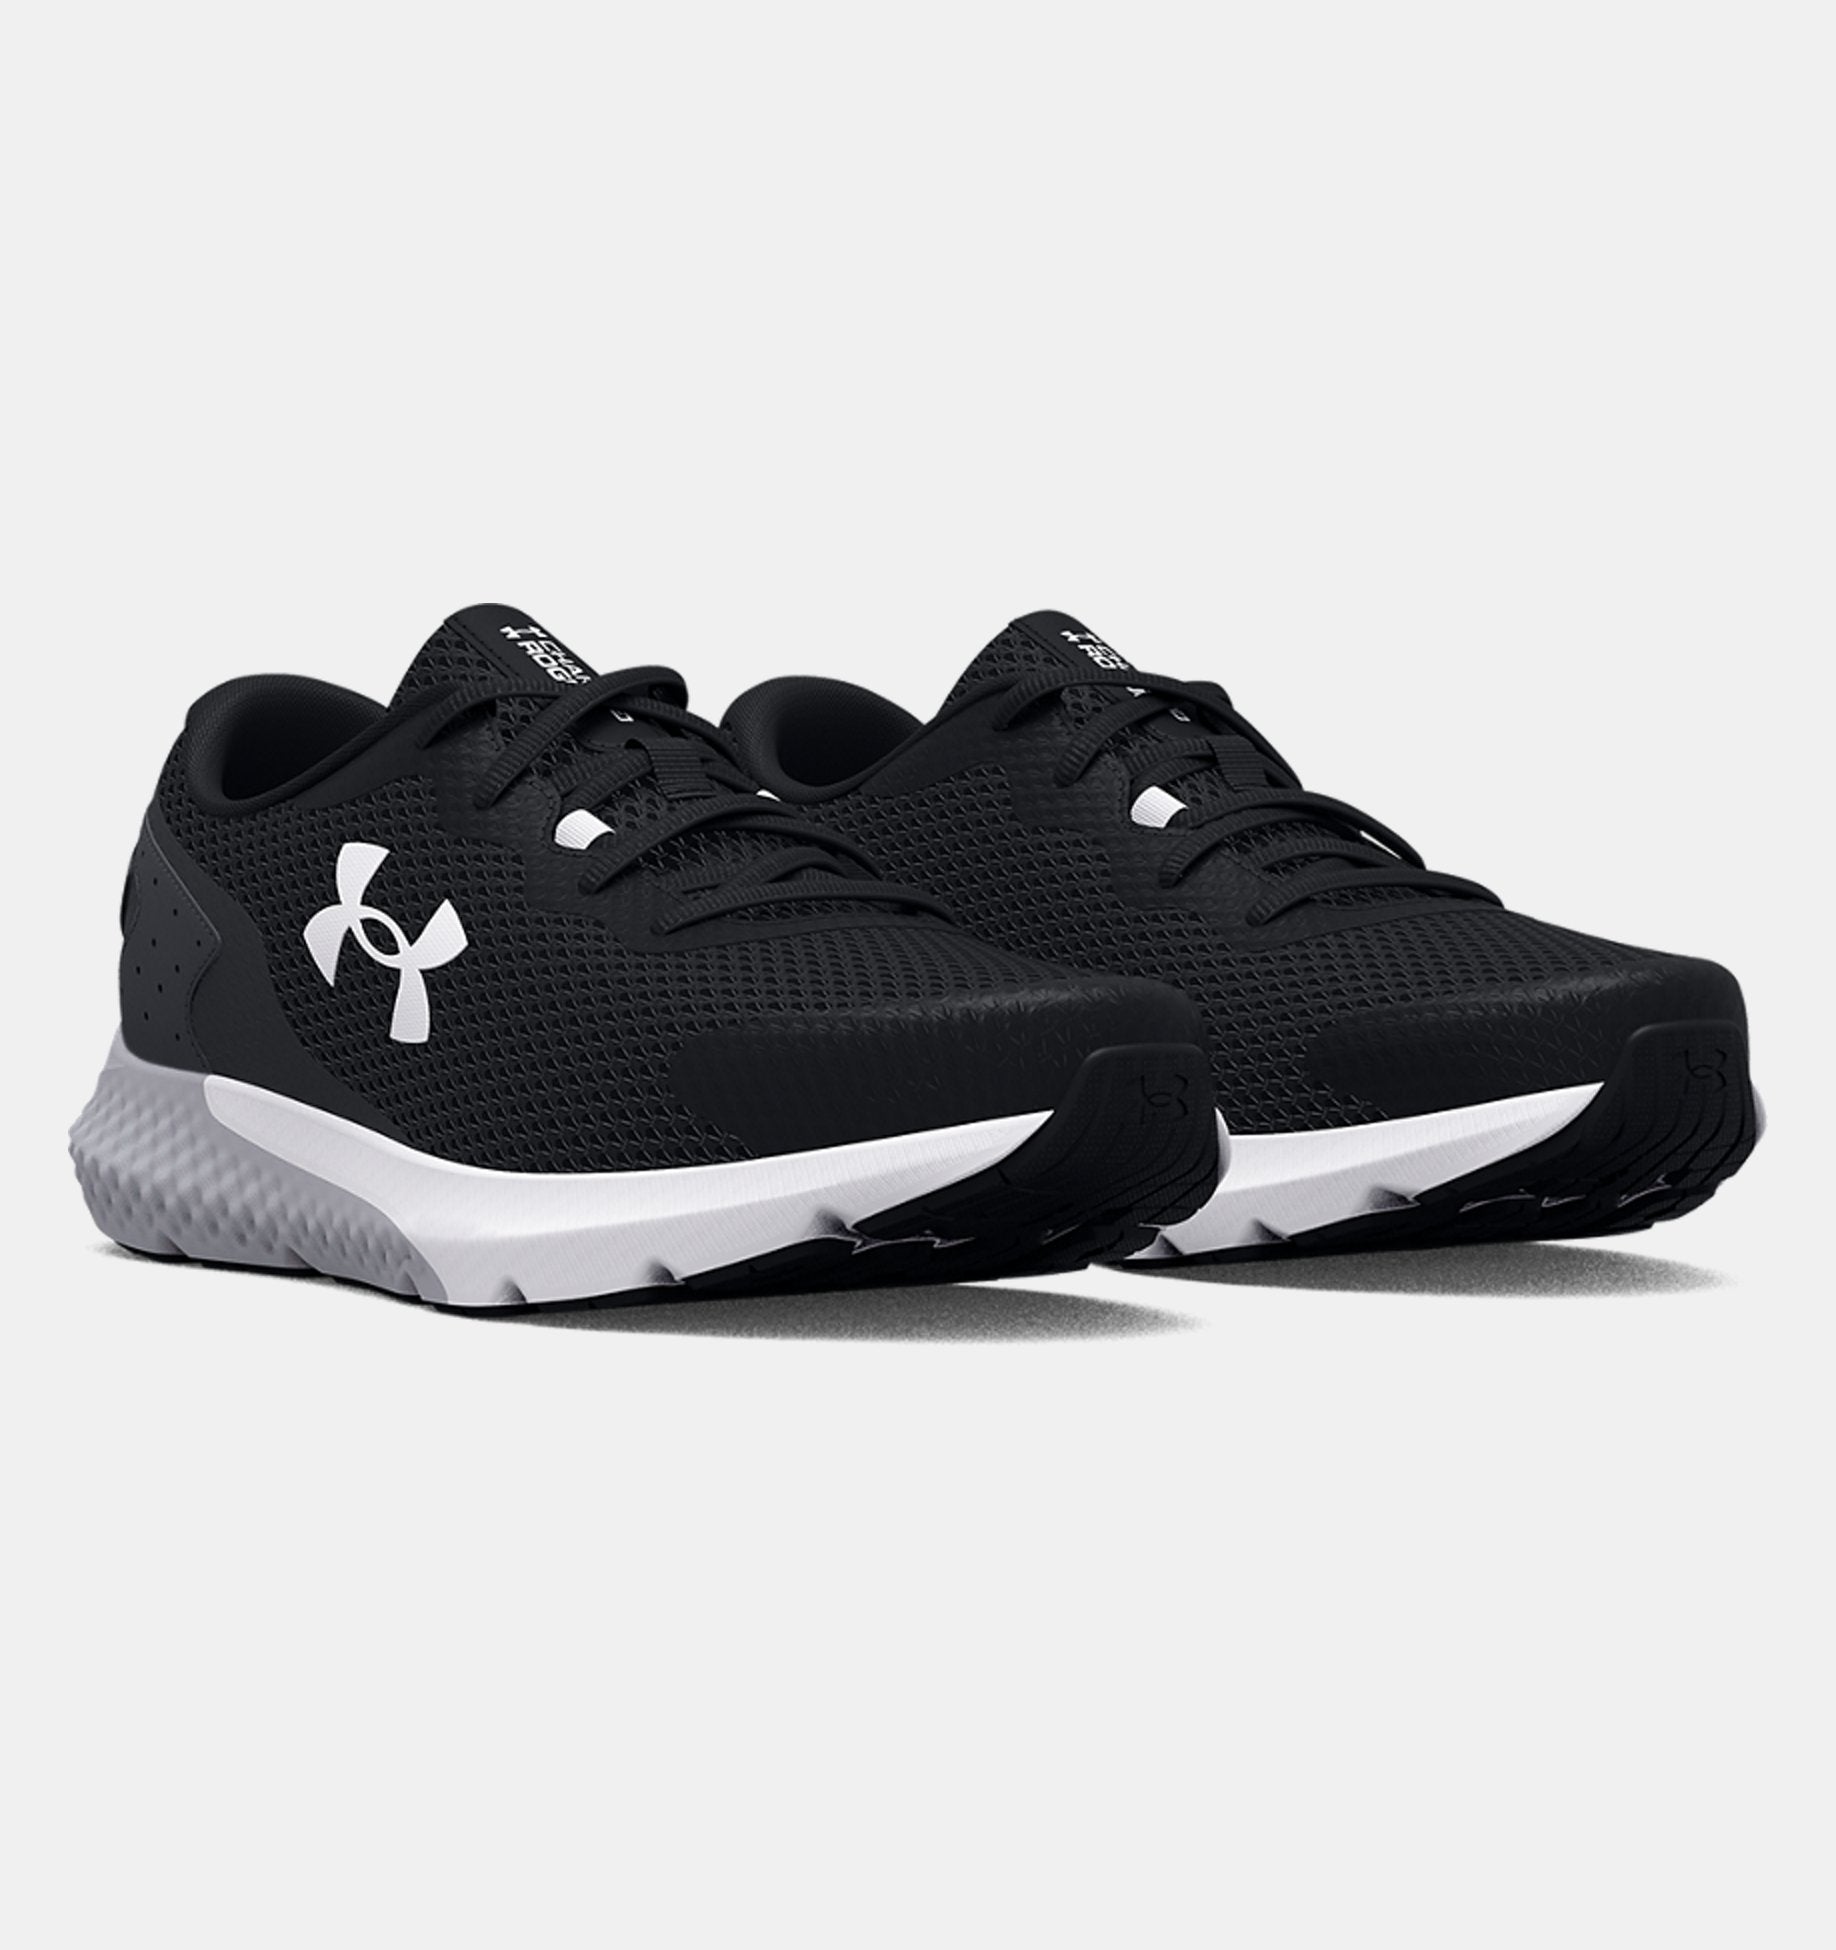 Under Armour Charged Rogue 3 Running Shoes Black